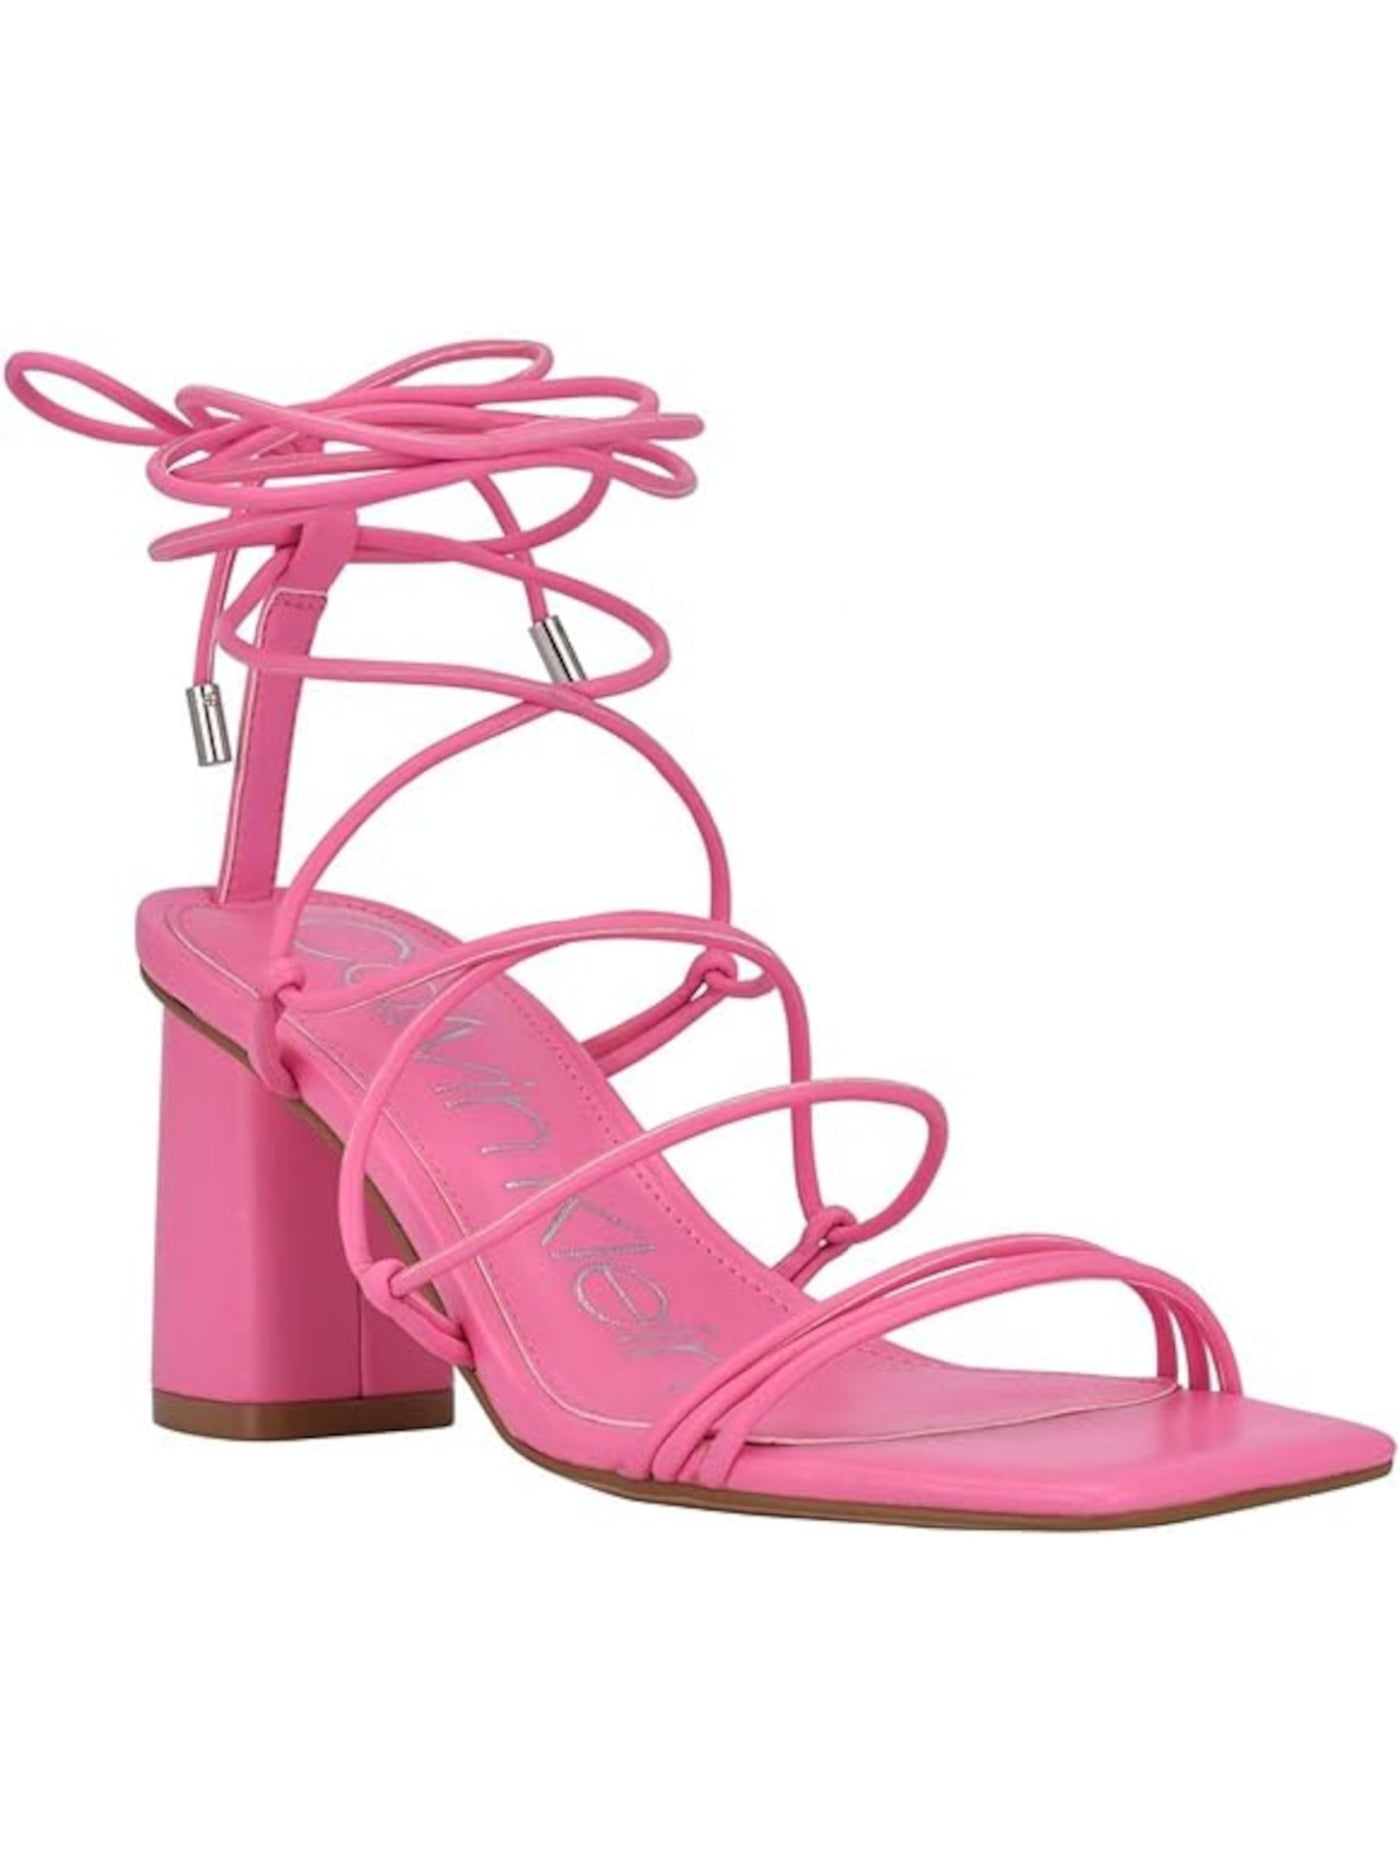 CALVIN KLEIN Womens Pink Padded Strappy Calista Square Toe Block Heel Lace-Up Heeled Sandal 9.5 M